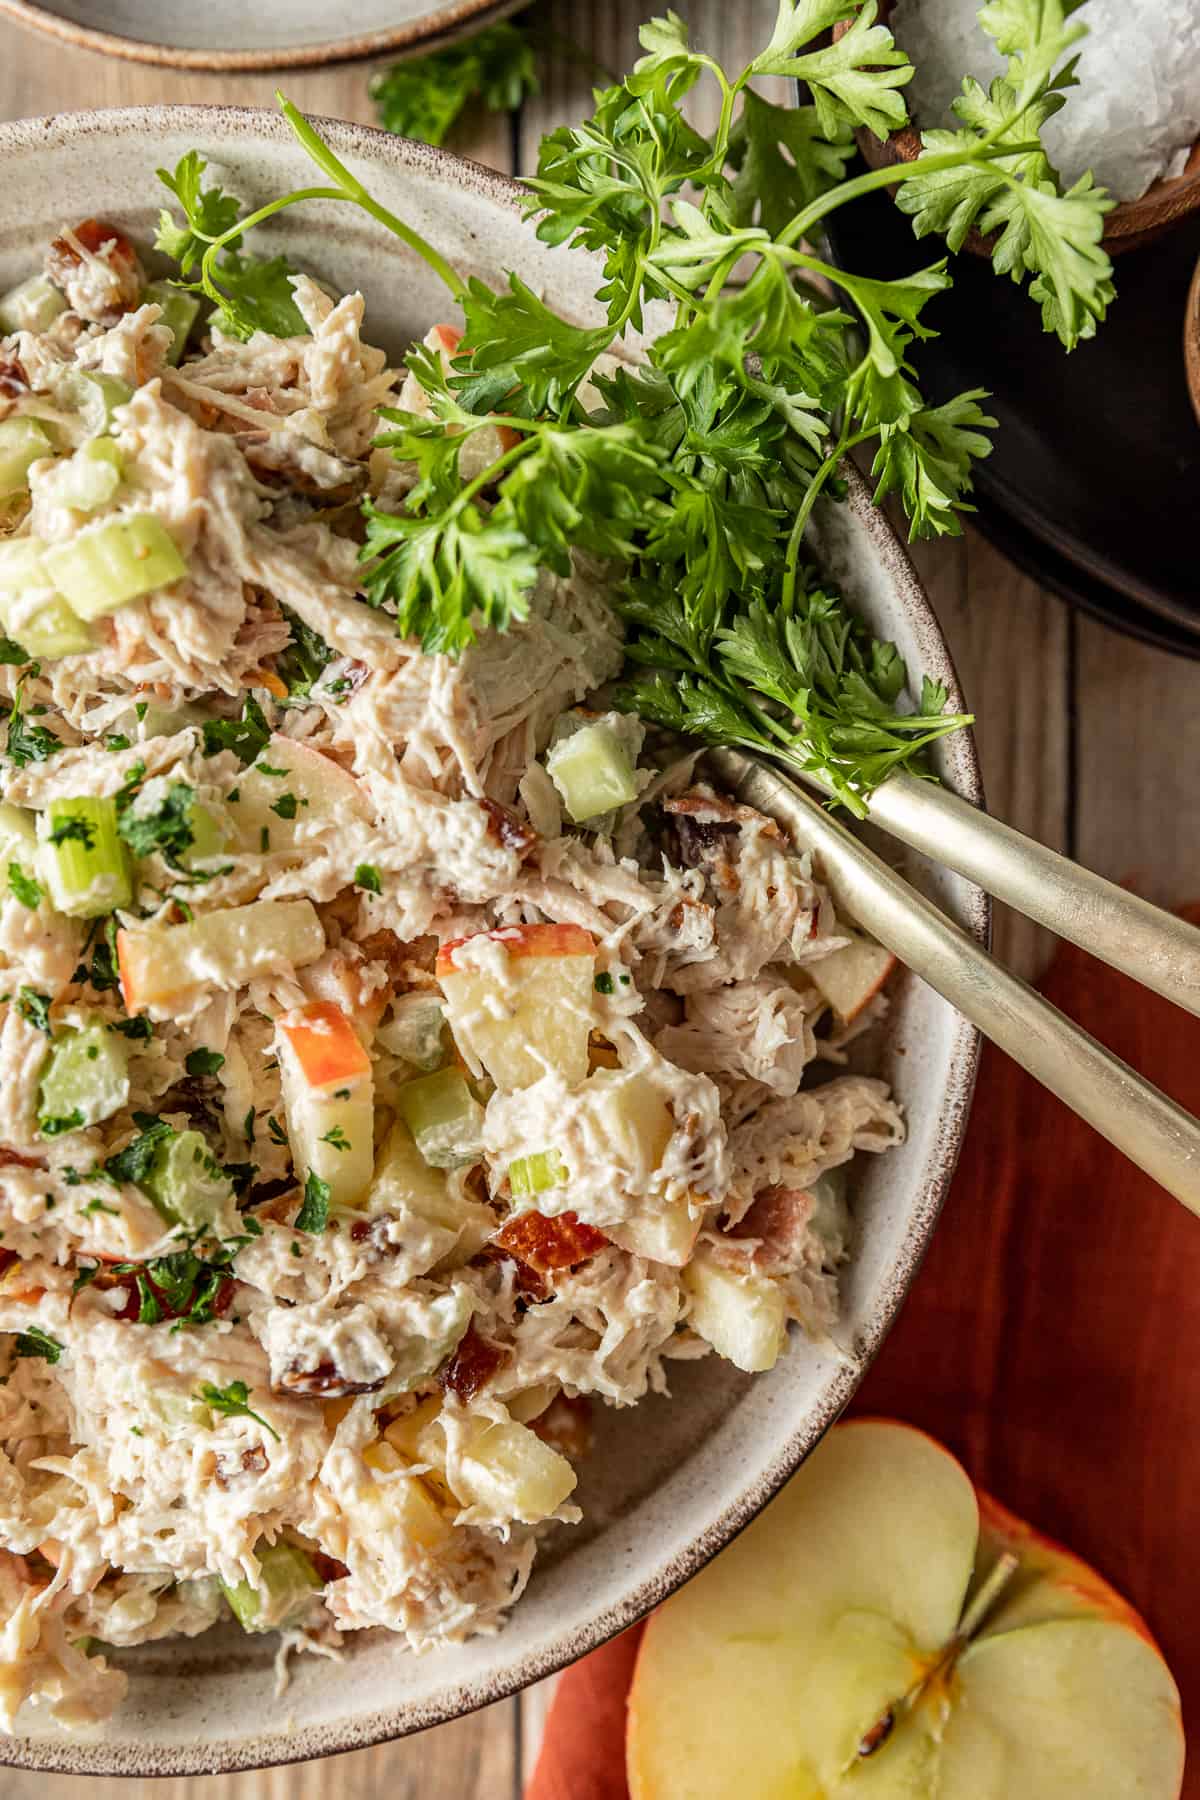 Chicken salad in a bowl on a wood background near chopped apples and topped with parsley.